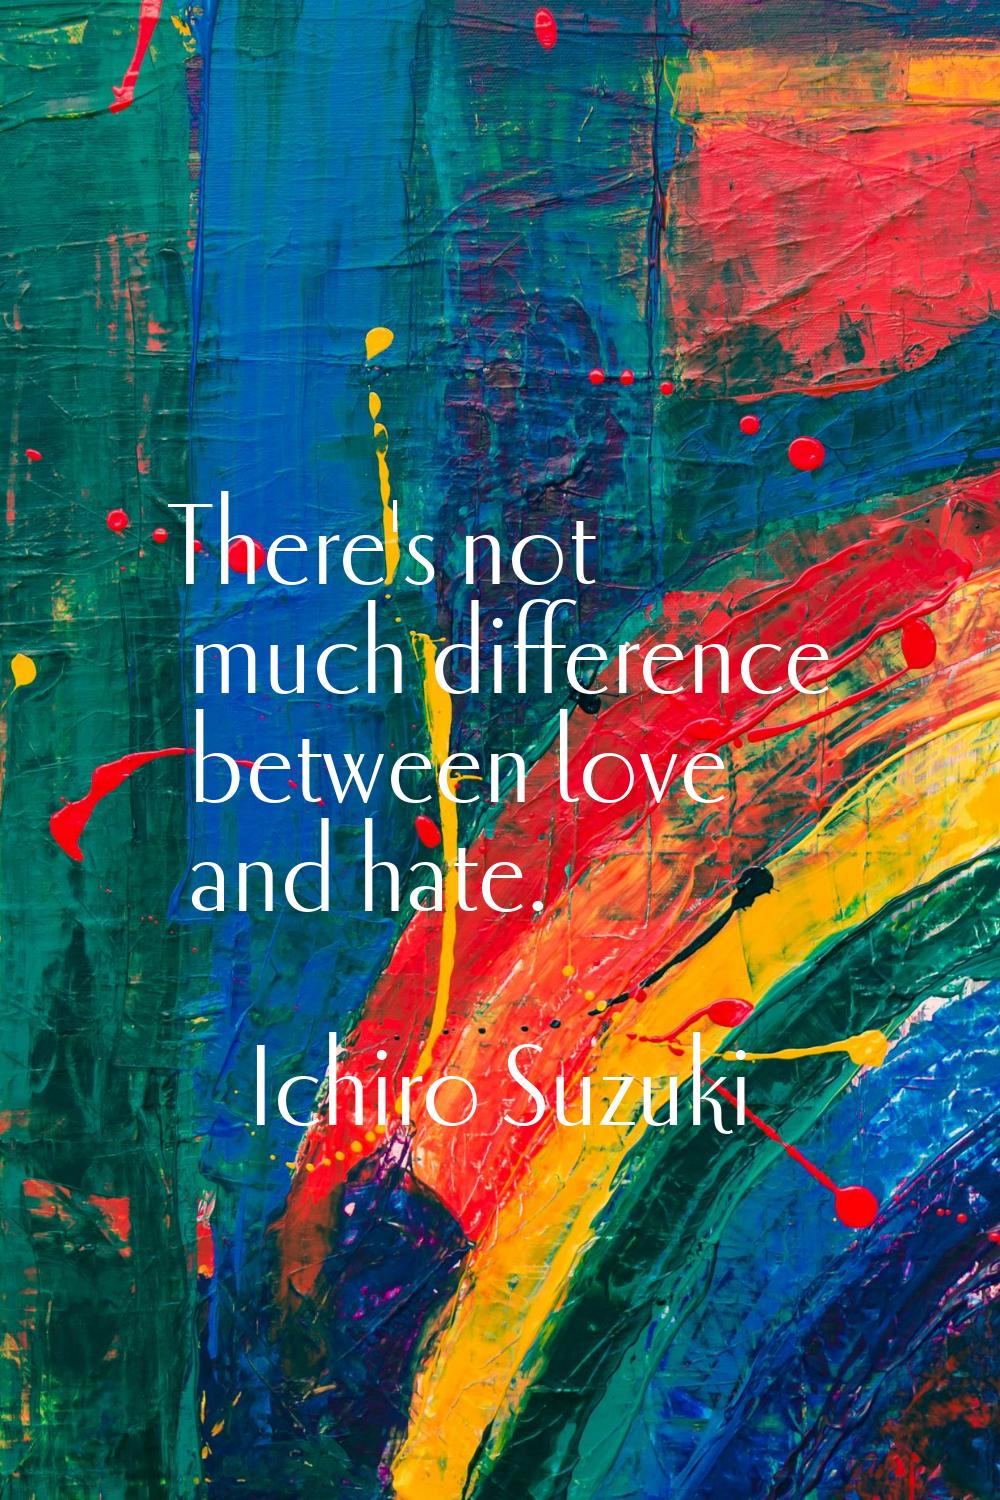 There's not much difference between love and hate.